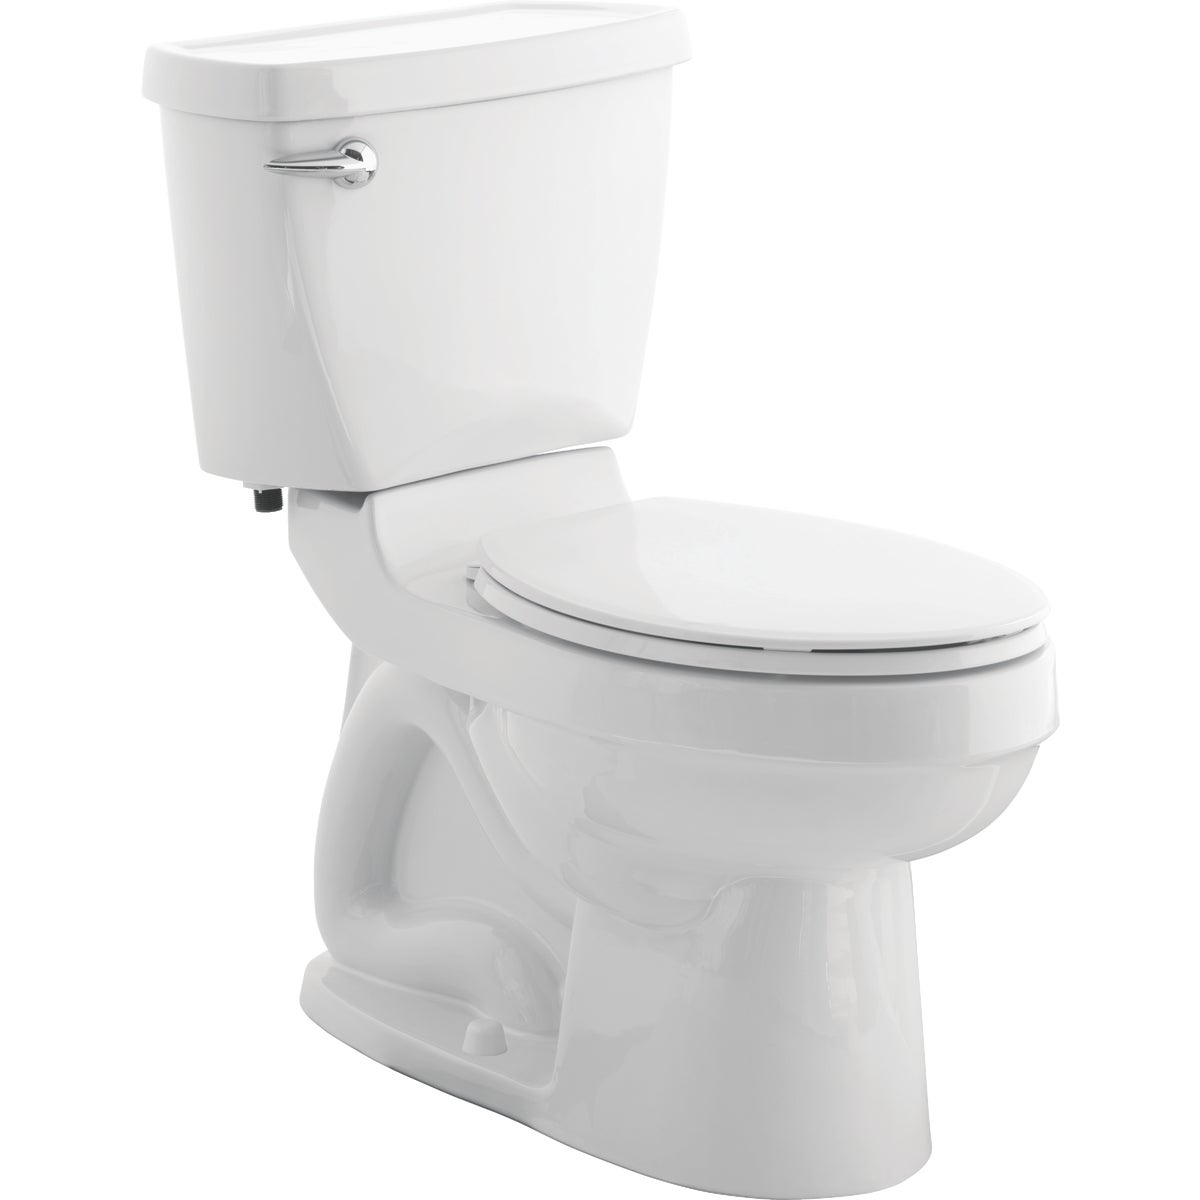 Item 401135, The toilet offers a 2-piece design with a separate tank and ADA (Americans 